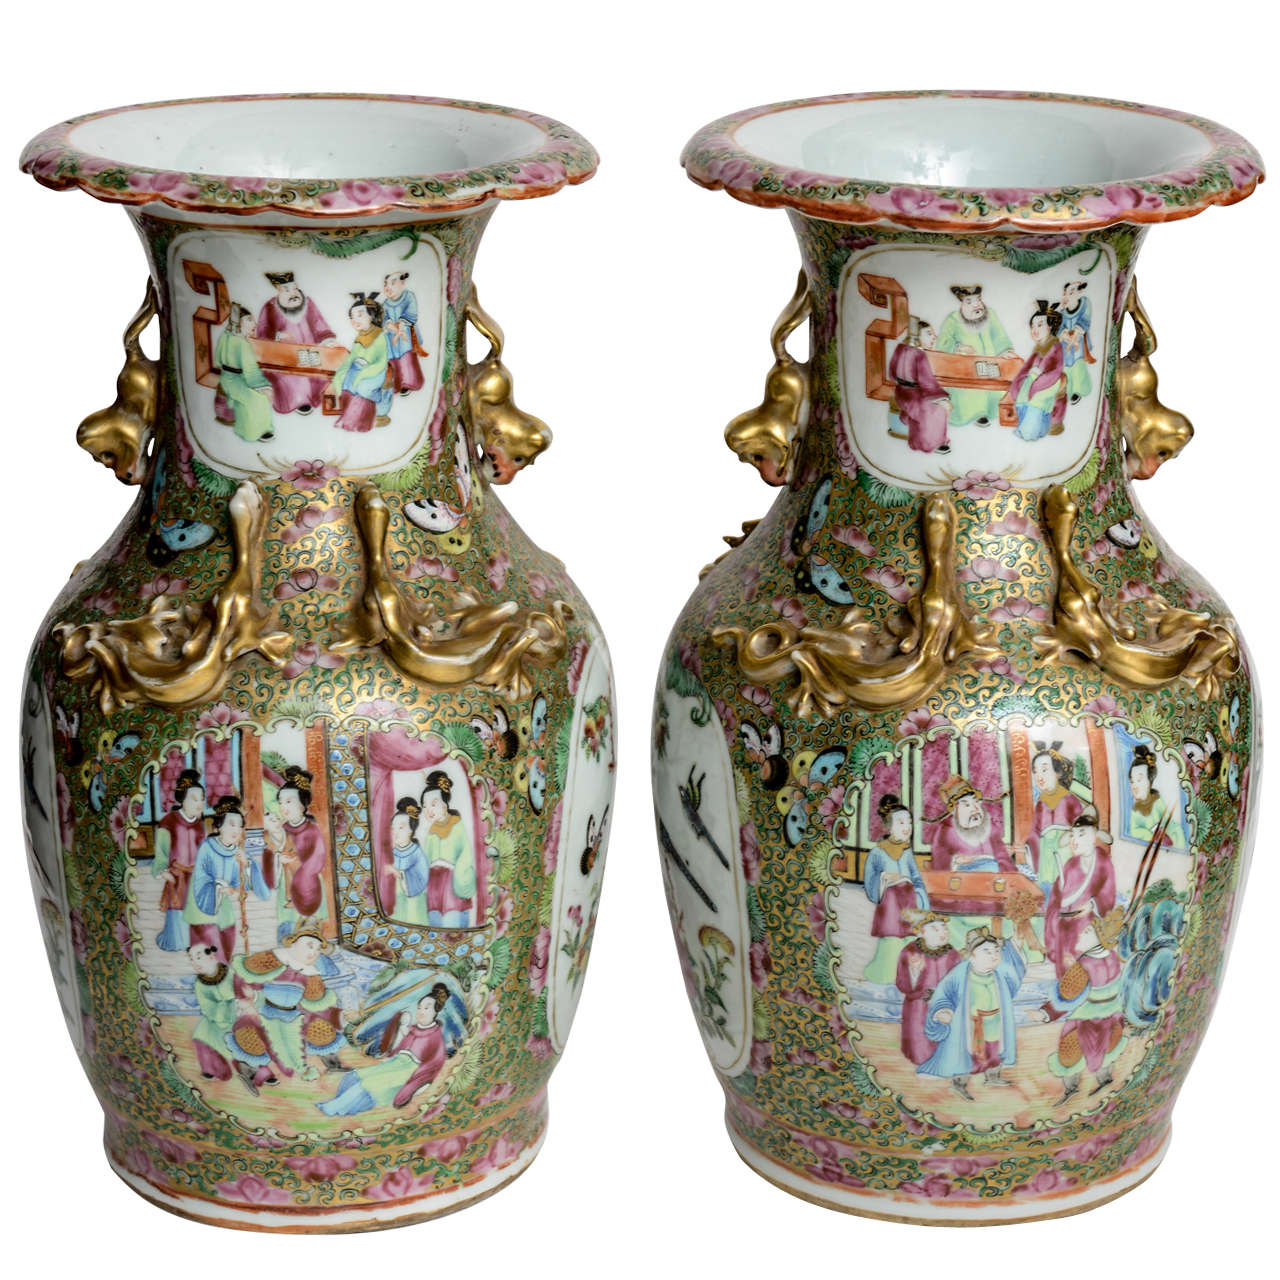 Rare Pair of Chinese Porcelain Famille Rose Vases, 19th Century For Sale